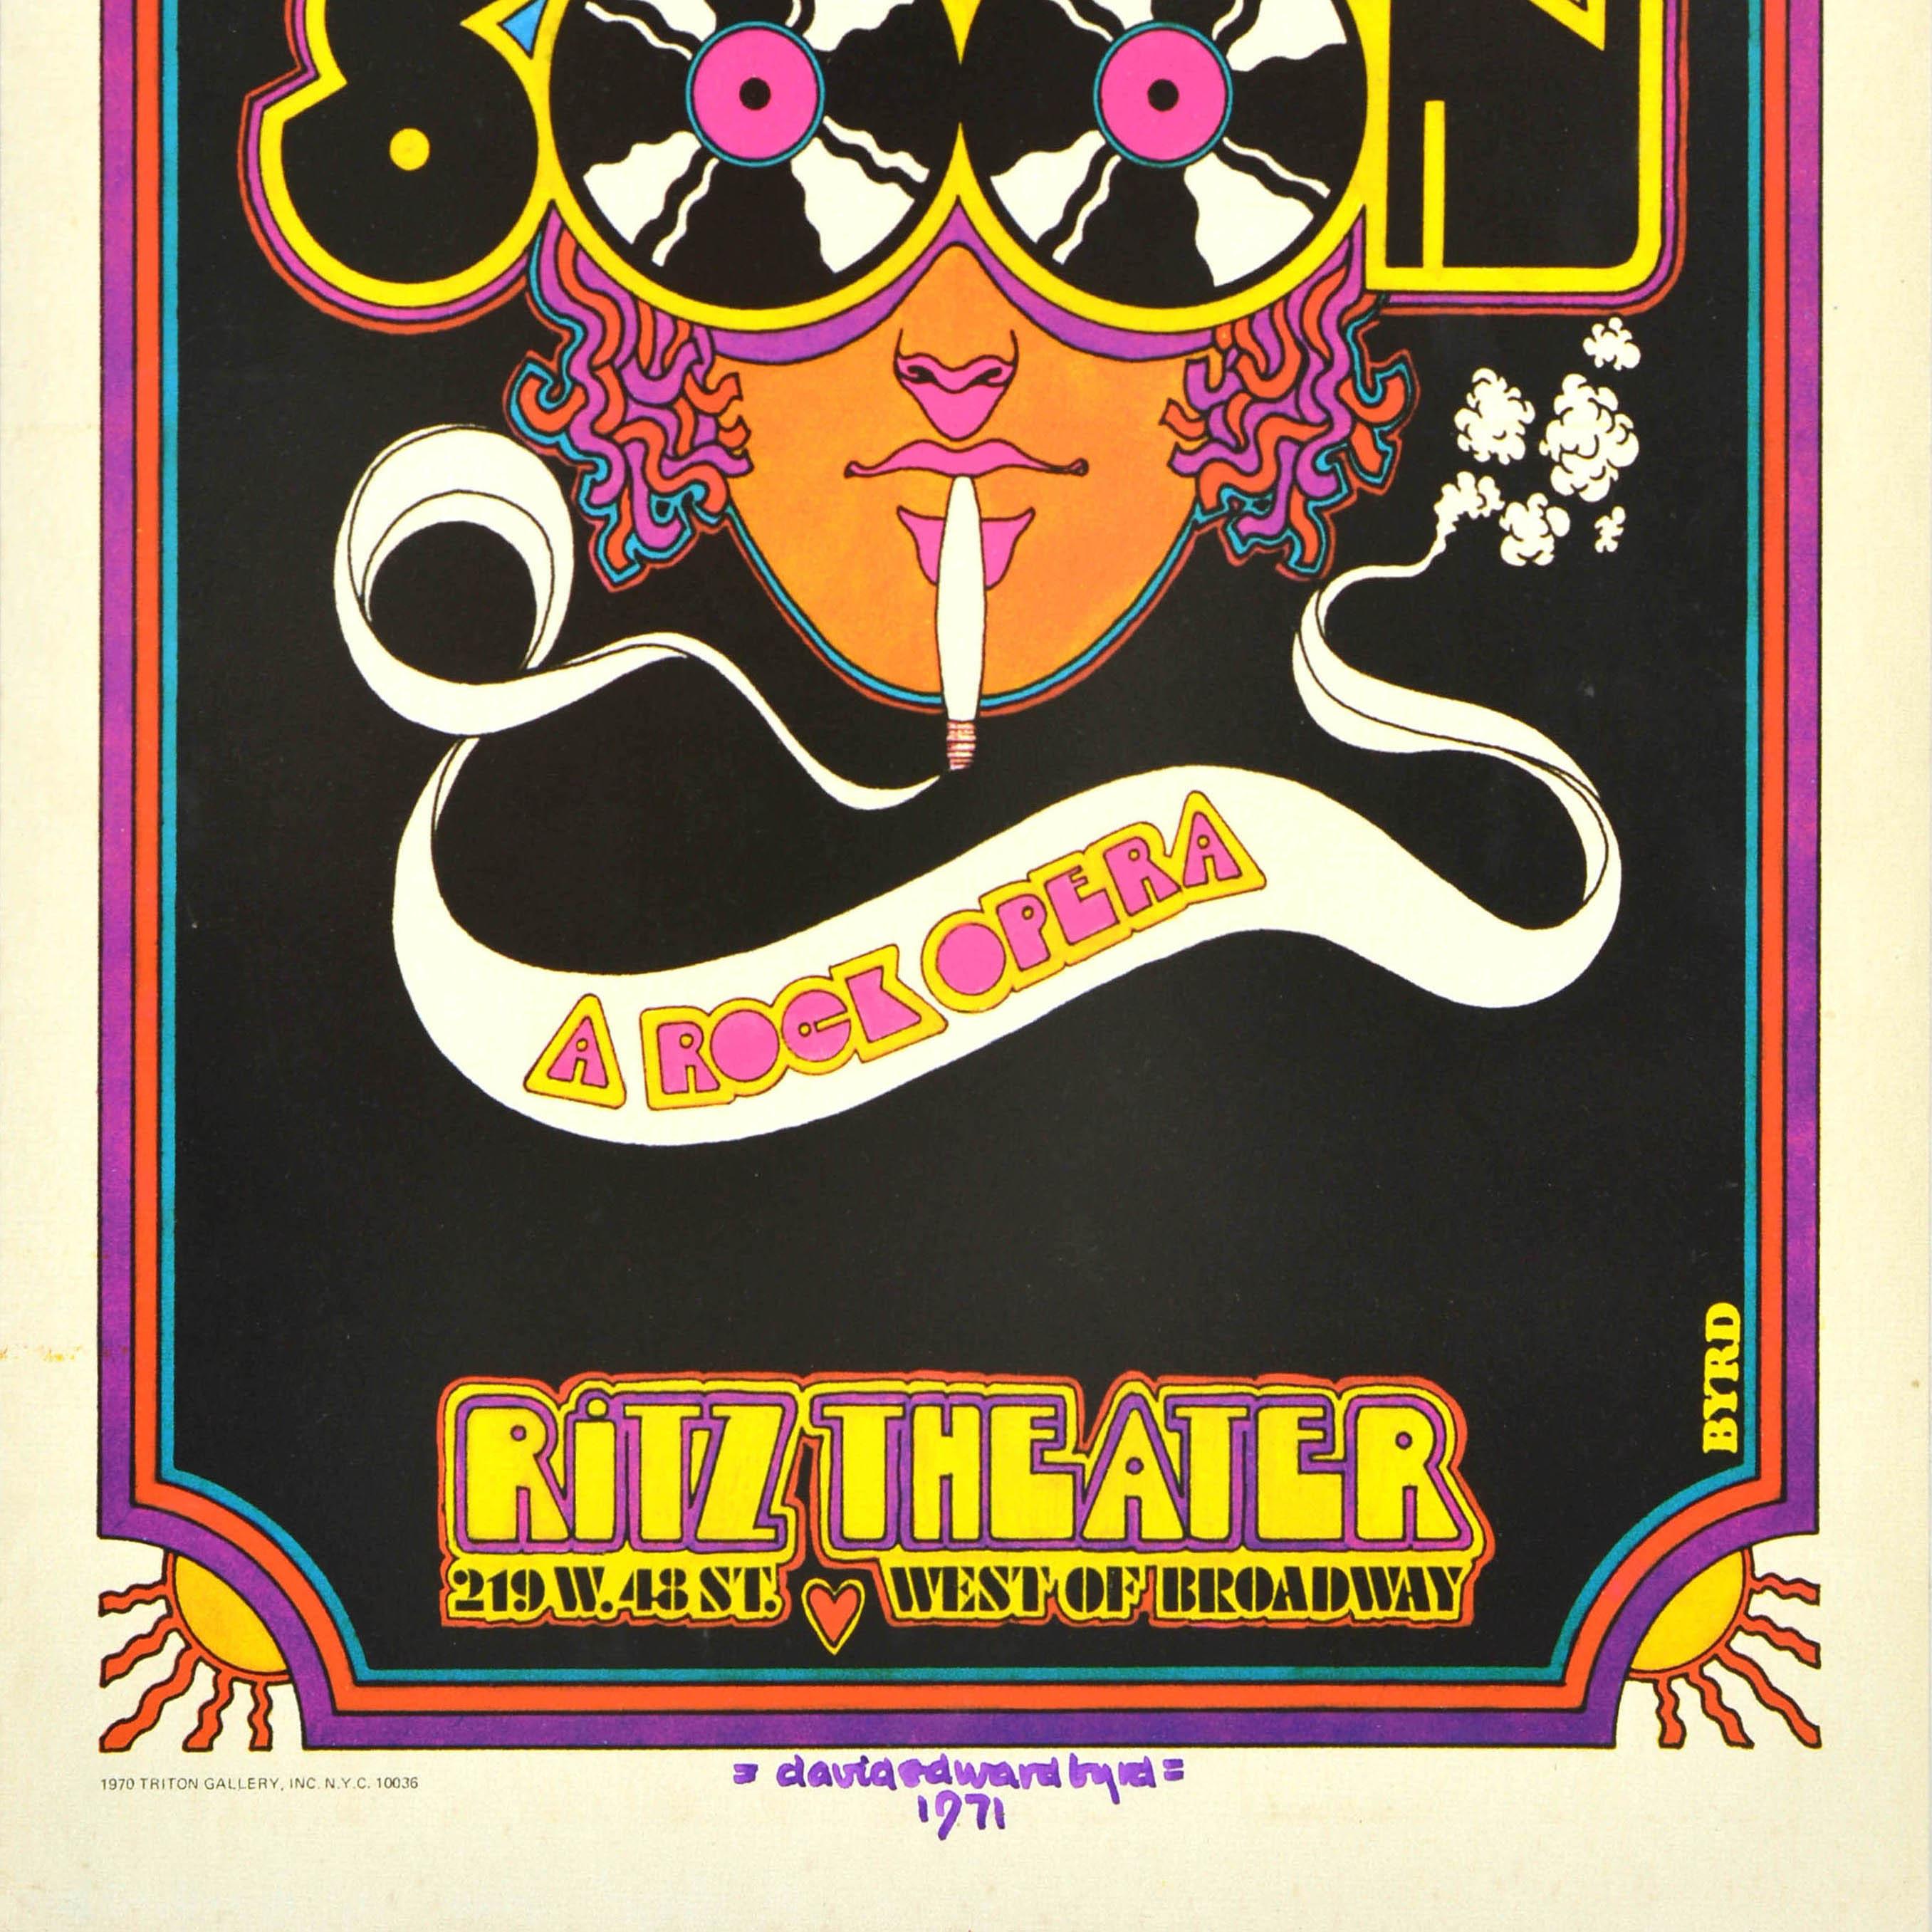 Original Vintage Musical Advertising Poster Soon Rock Opera David Edward Byrd In Good Condition For Sale In London, GB